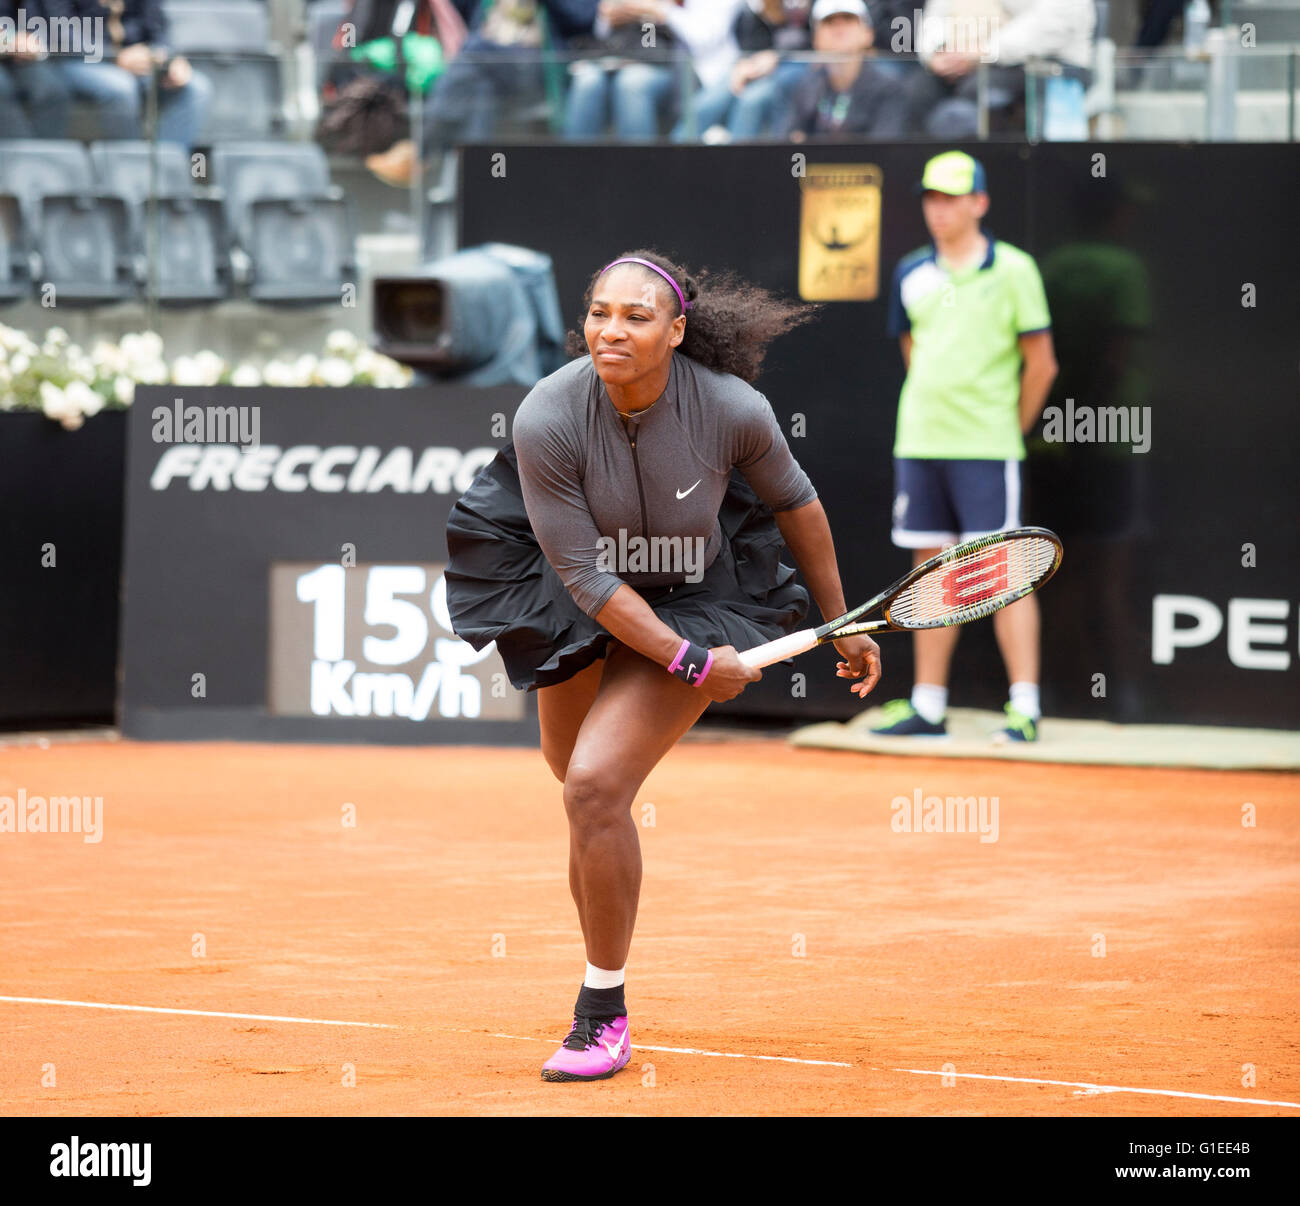 Rome, Italy. 14th May, 2016. Serena Williams serves the first ball in the semi final match at the Rome Tennis Internationals, Stock Photo